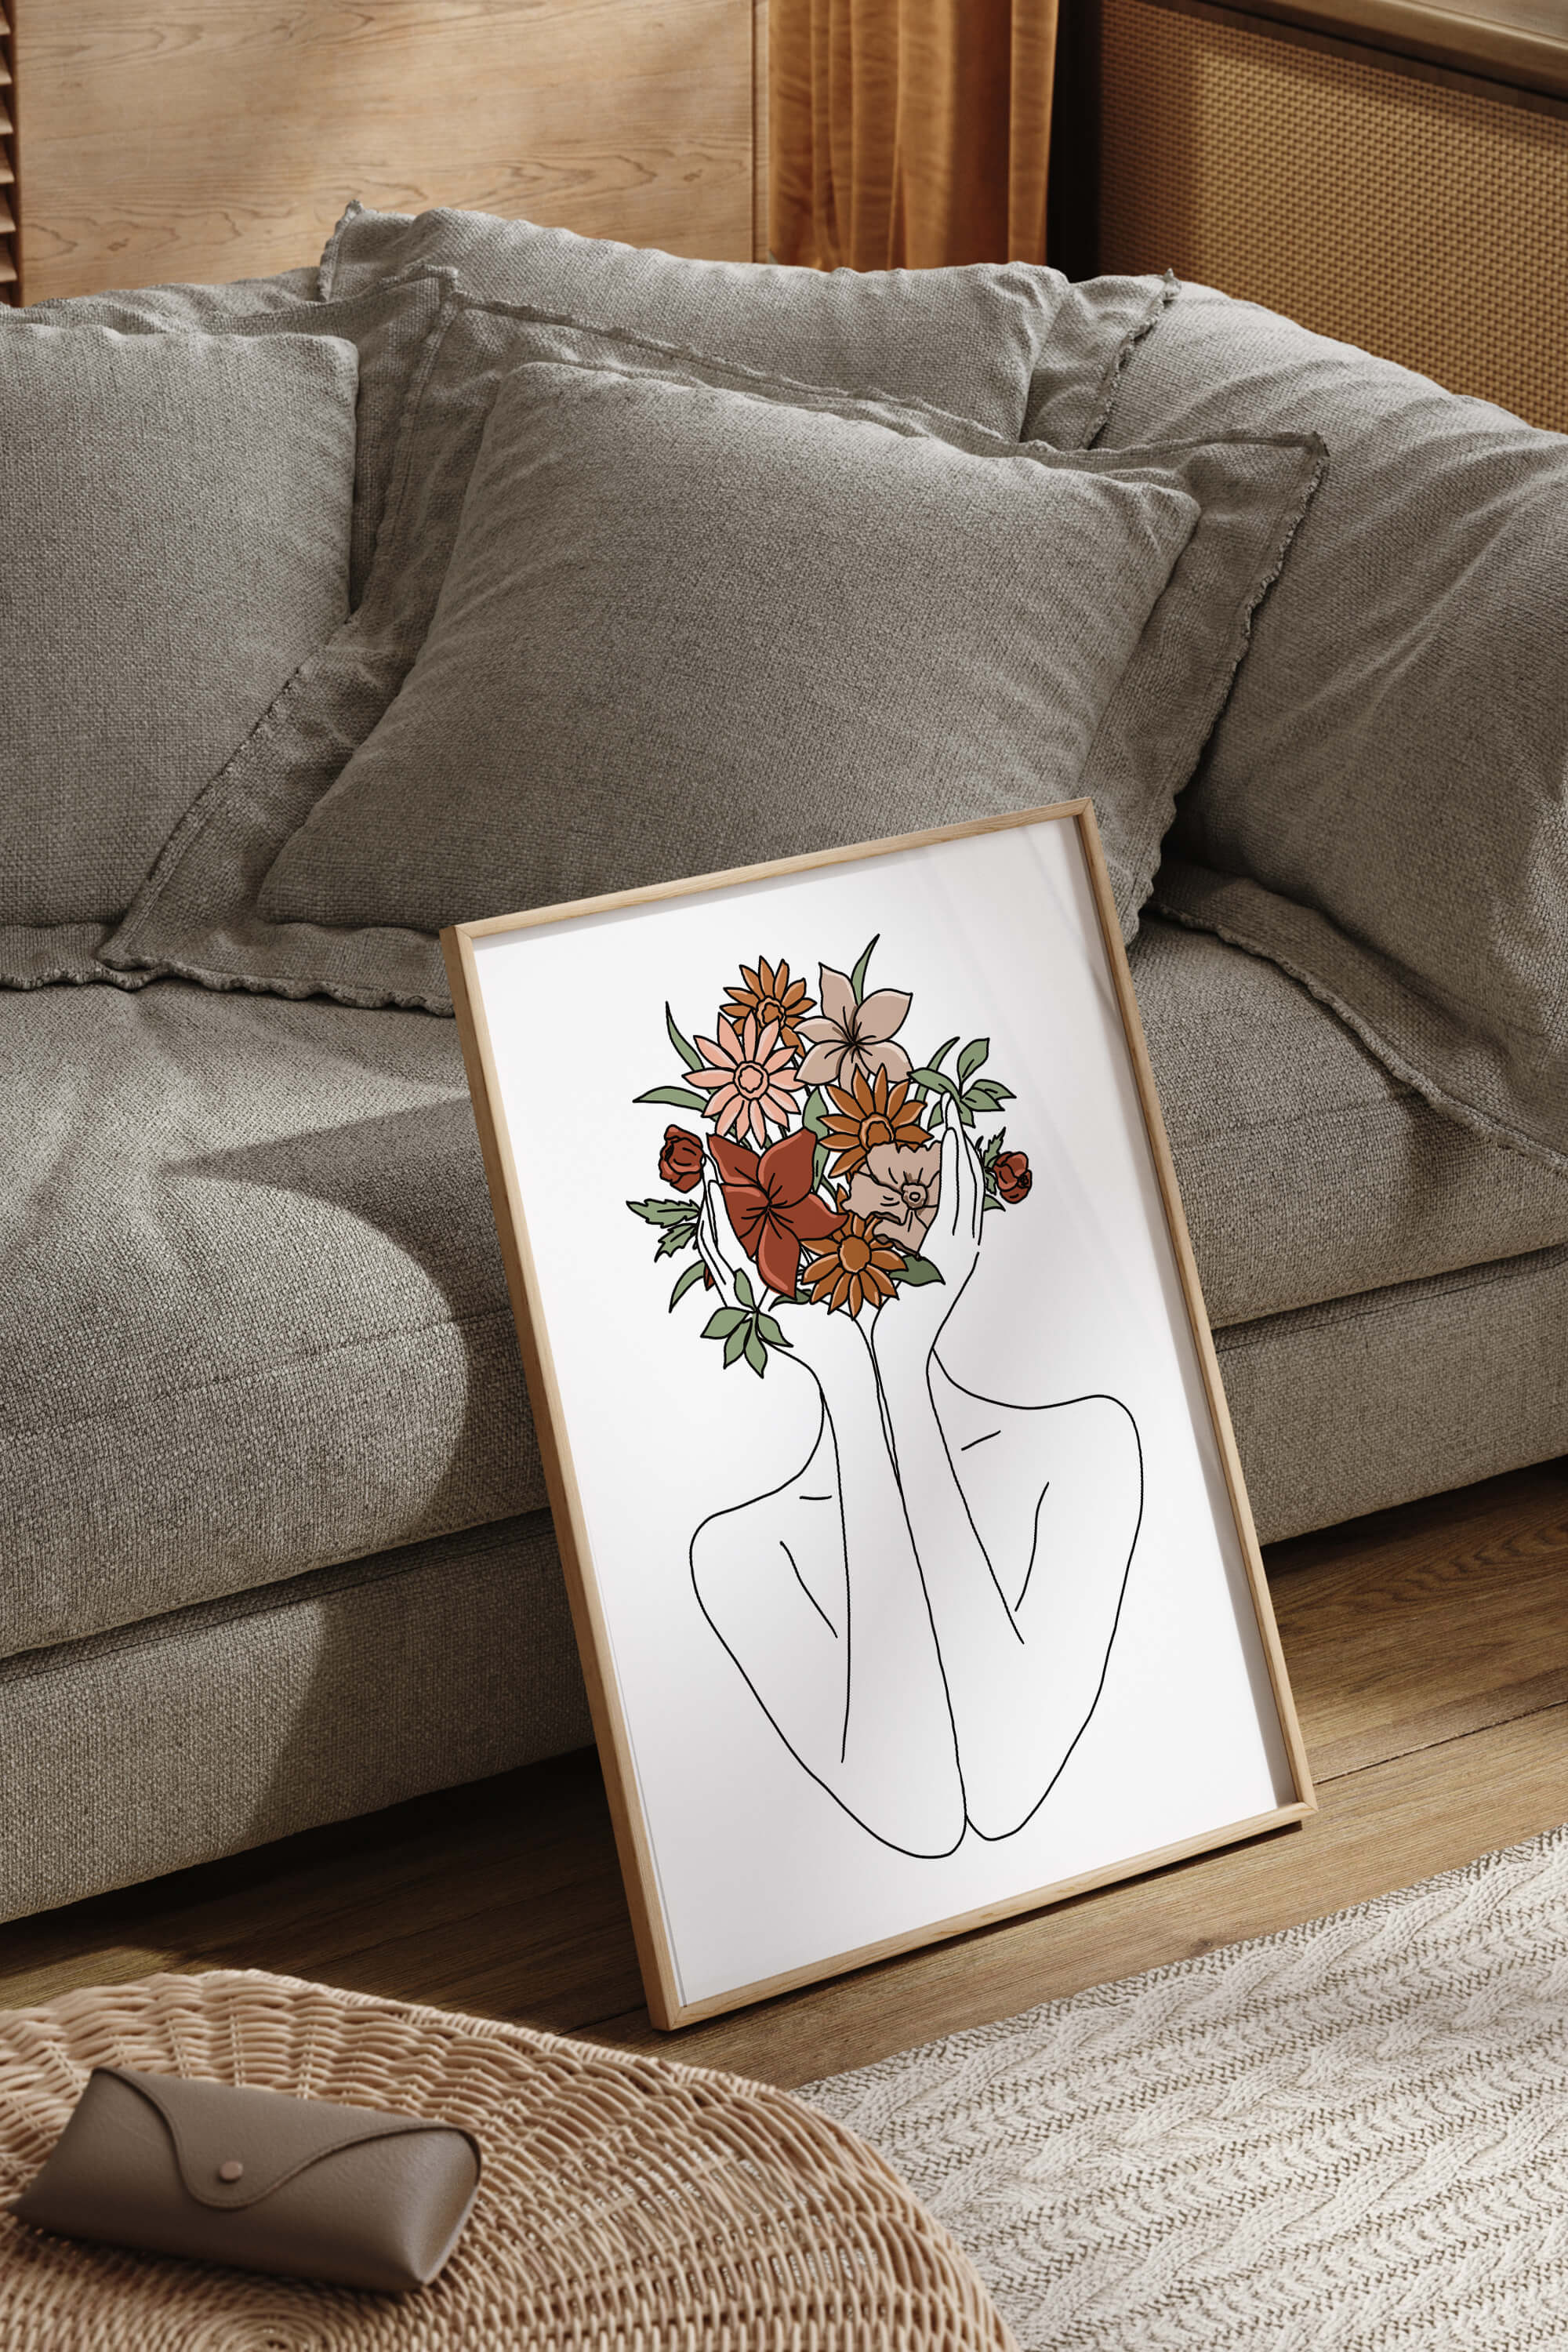 Large floral wall art decor with bold yet elegant design, making a striking statement in any room.